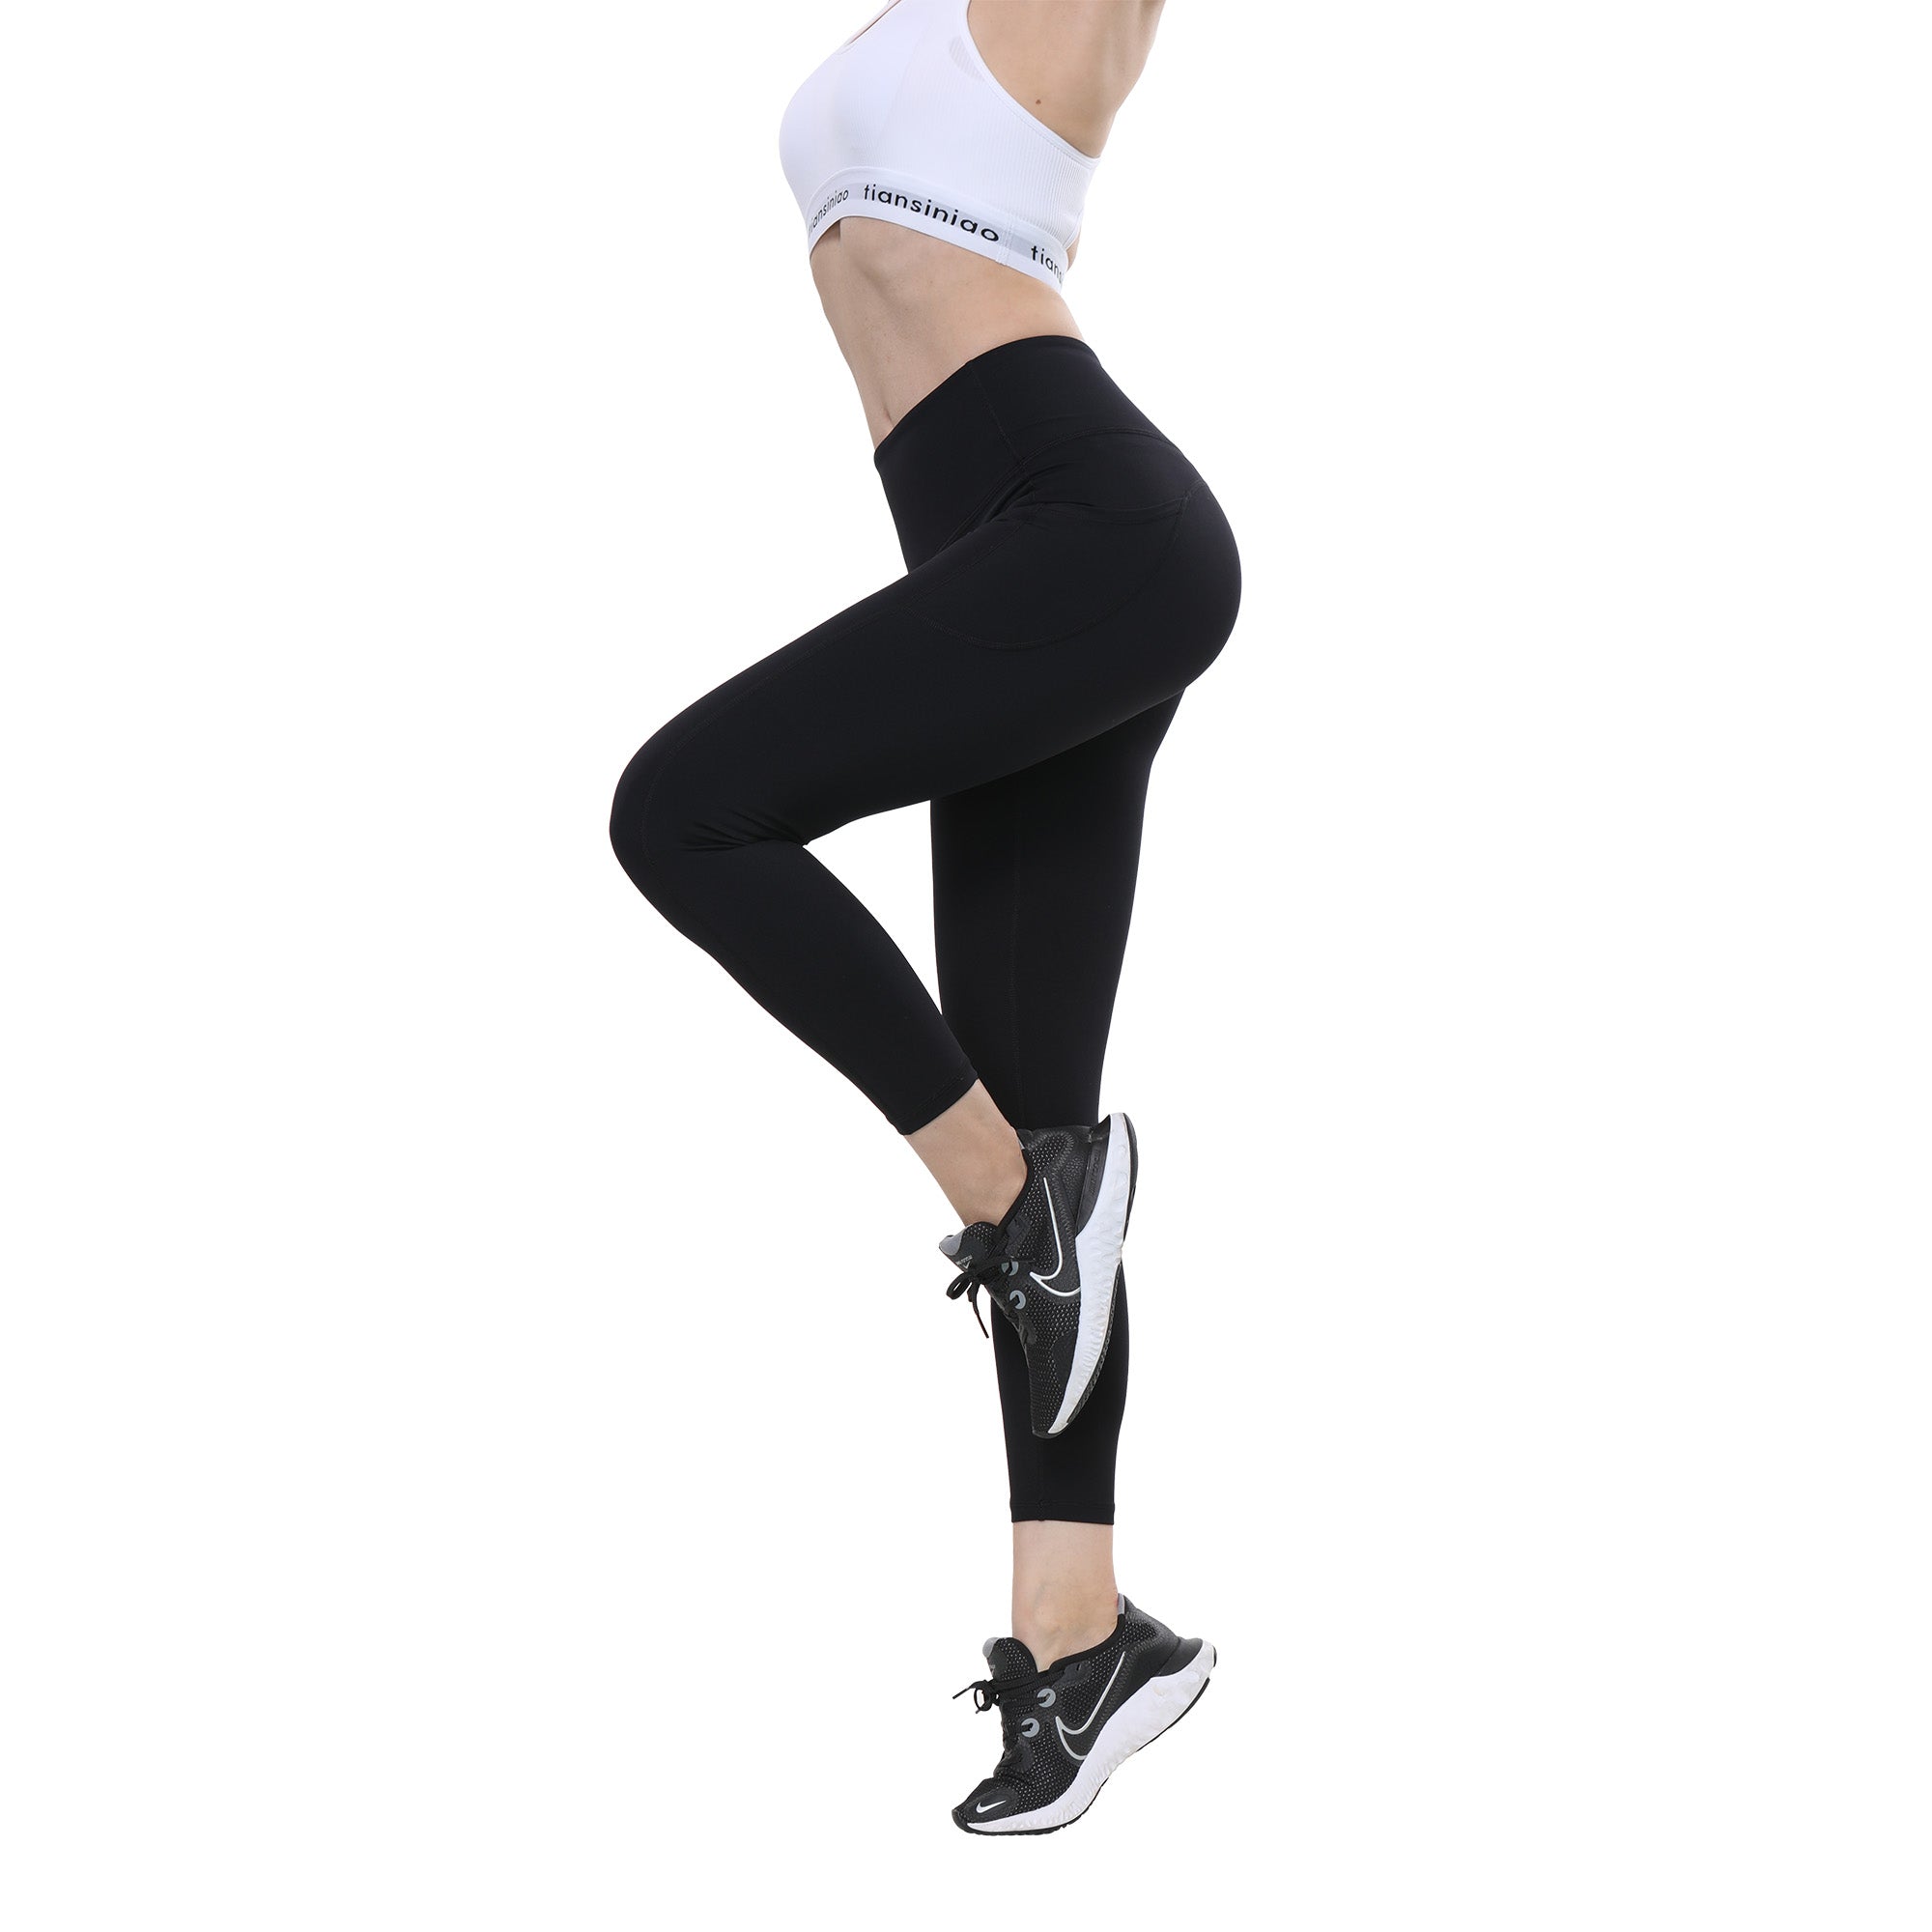 ALPHA CAMP Ombre Seamless High Waist Sports Leggings Stretchy Fitness